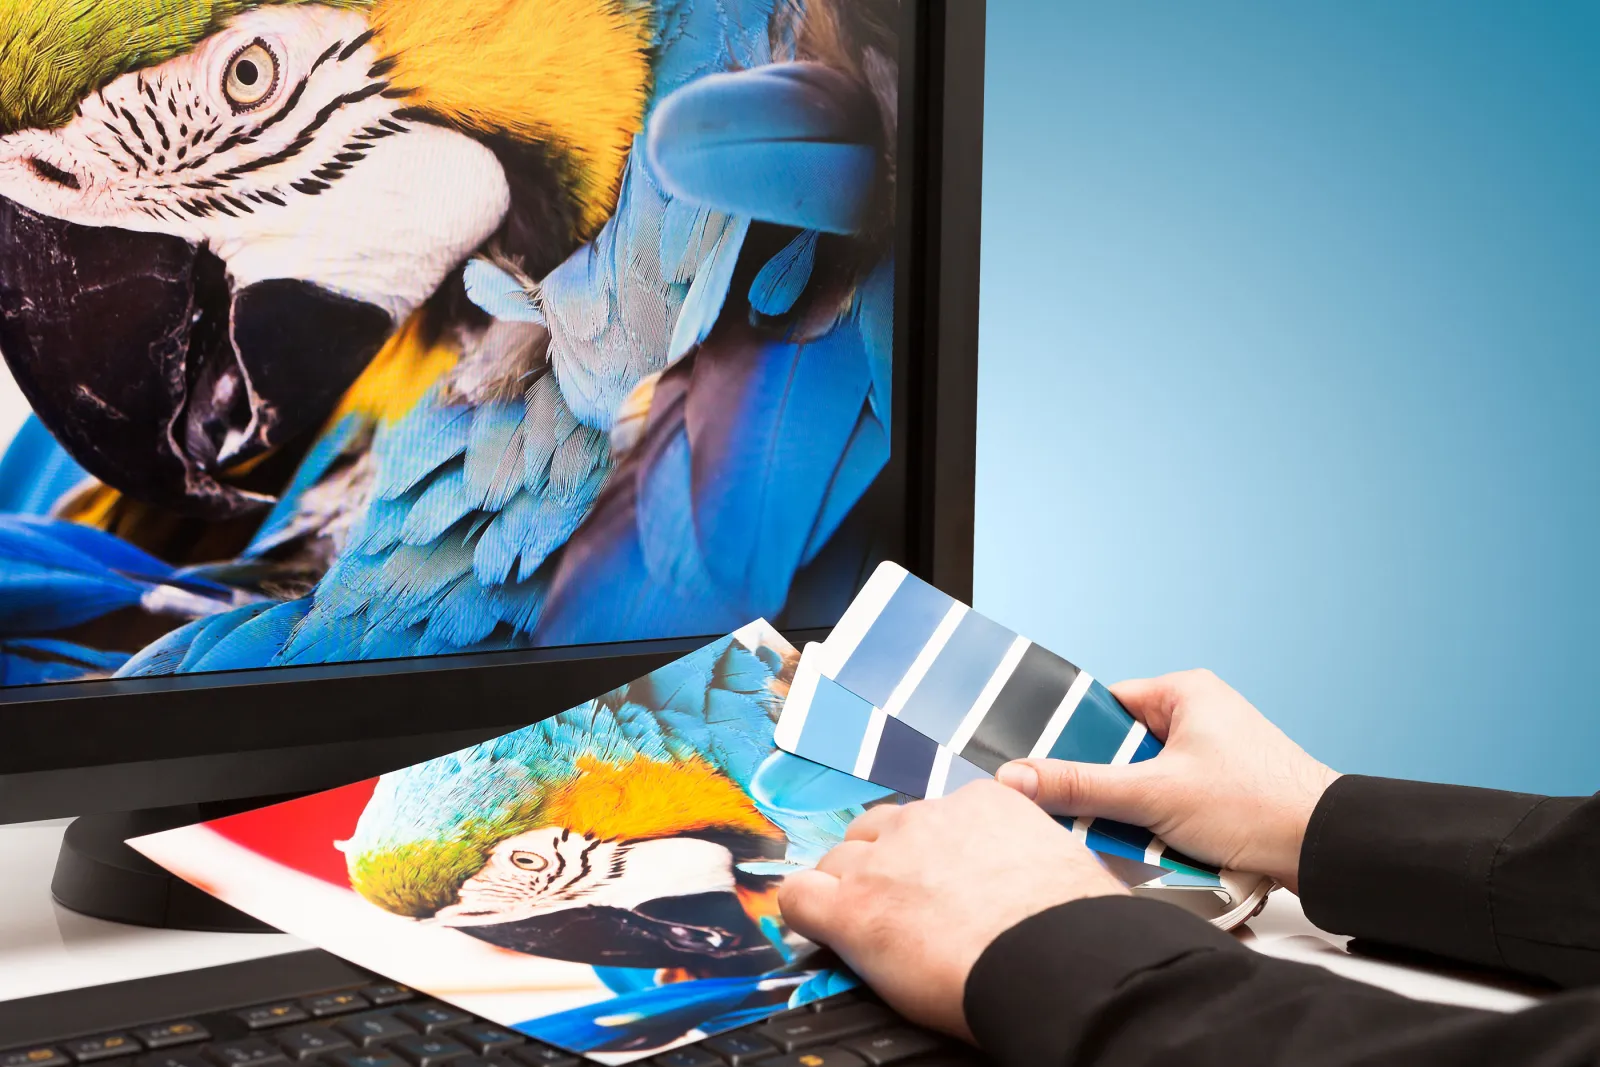 A graphic designer checks the color of a high resolution image of a blue macaw